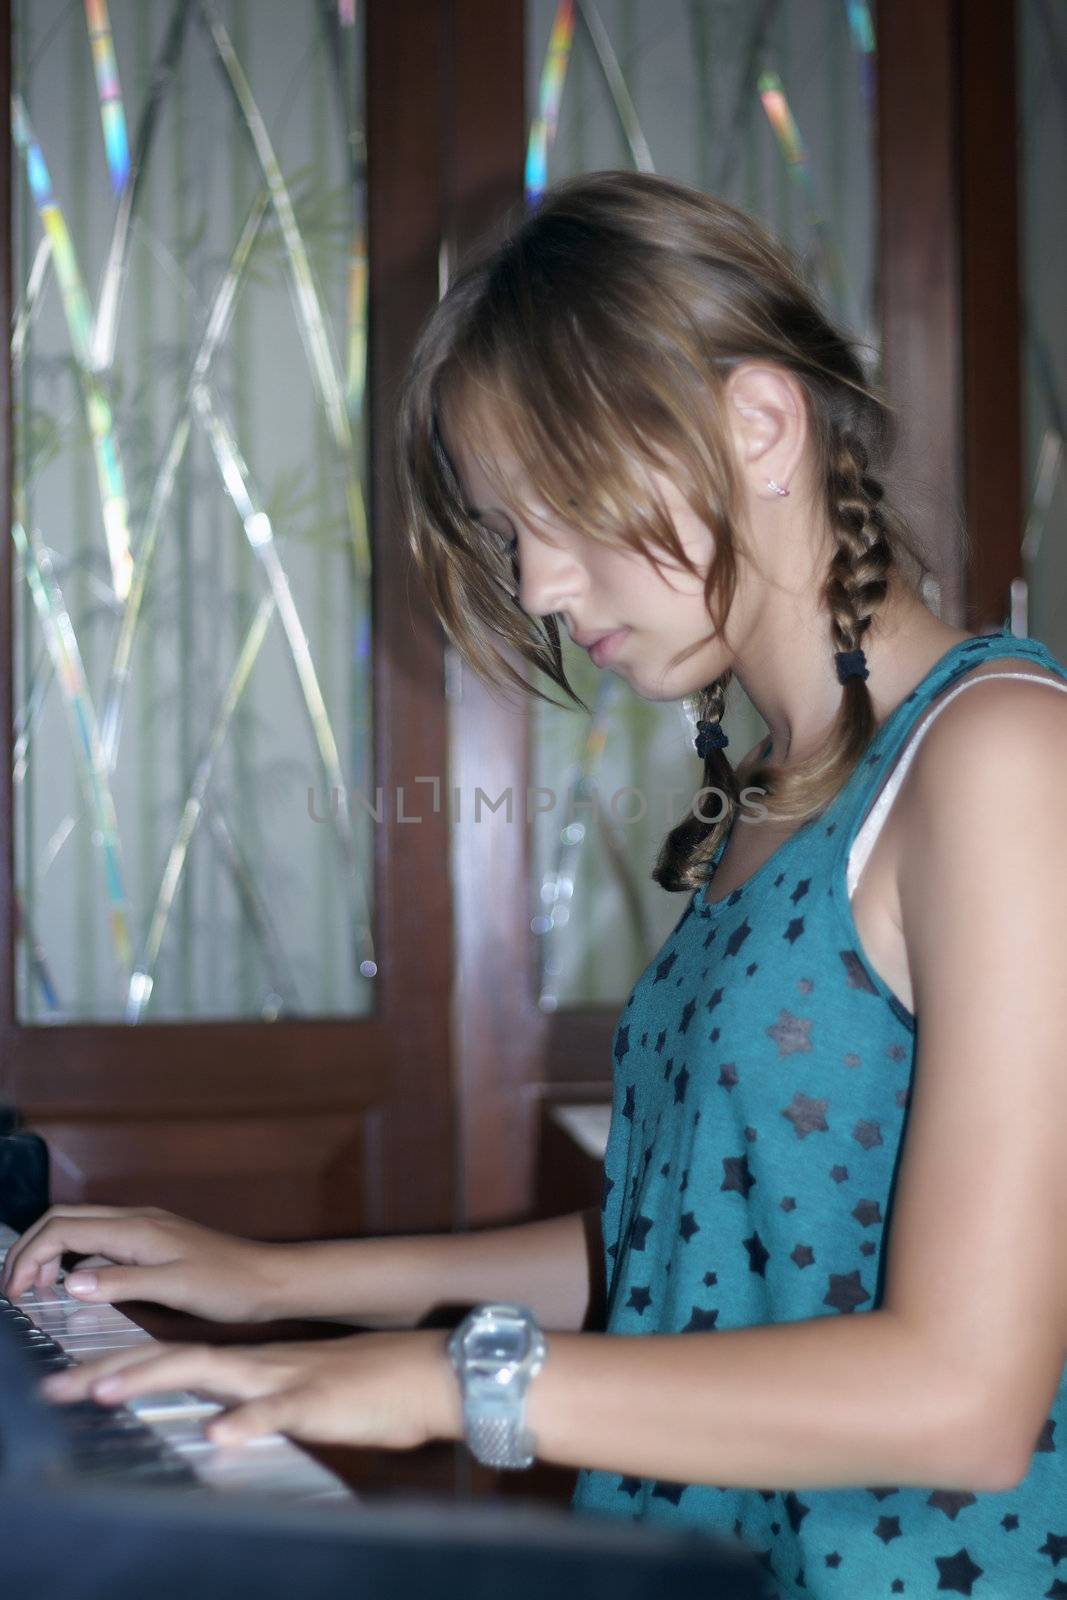 Twelve-year-old russian girl in Thailand. Summer 2012